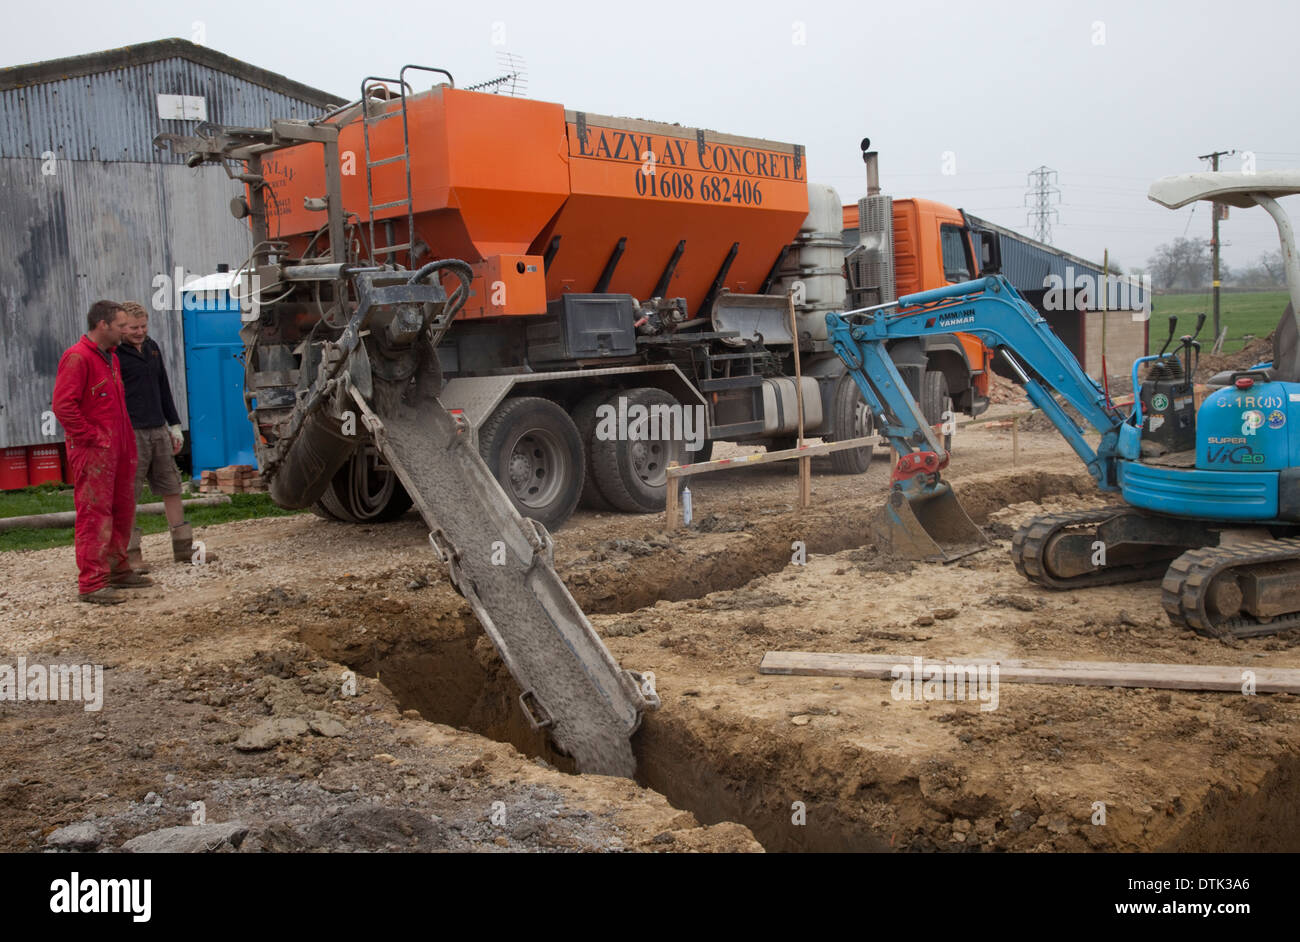 EasyLay concrete lorry pouring concrete into newly dug footings UK Stock Photo